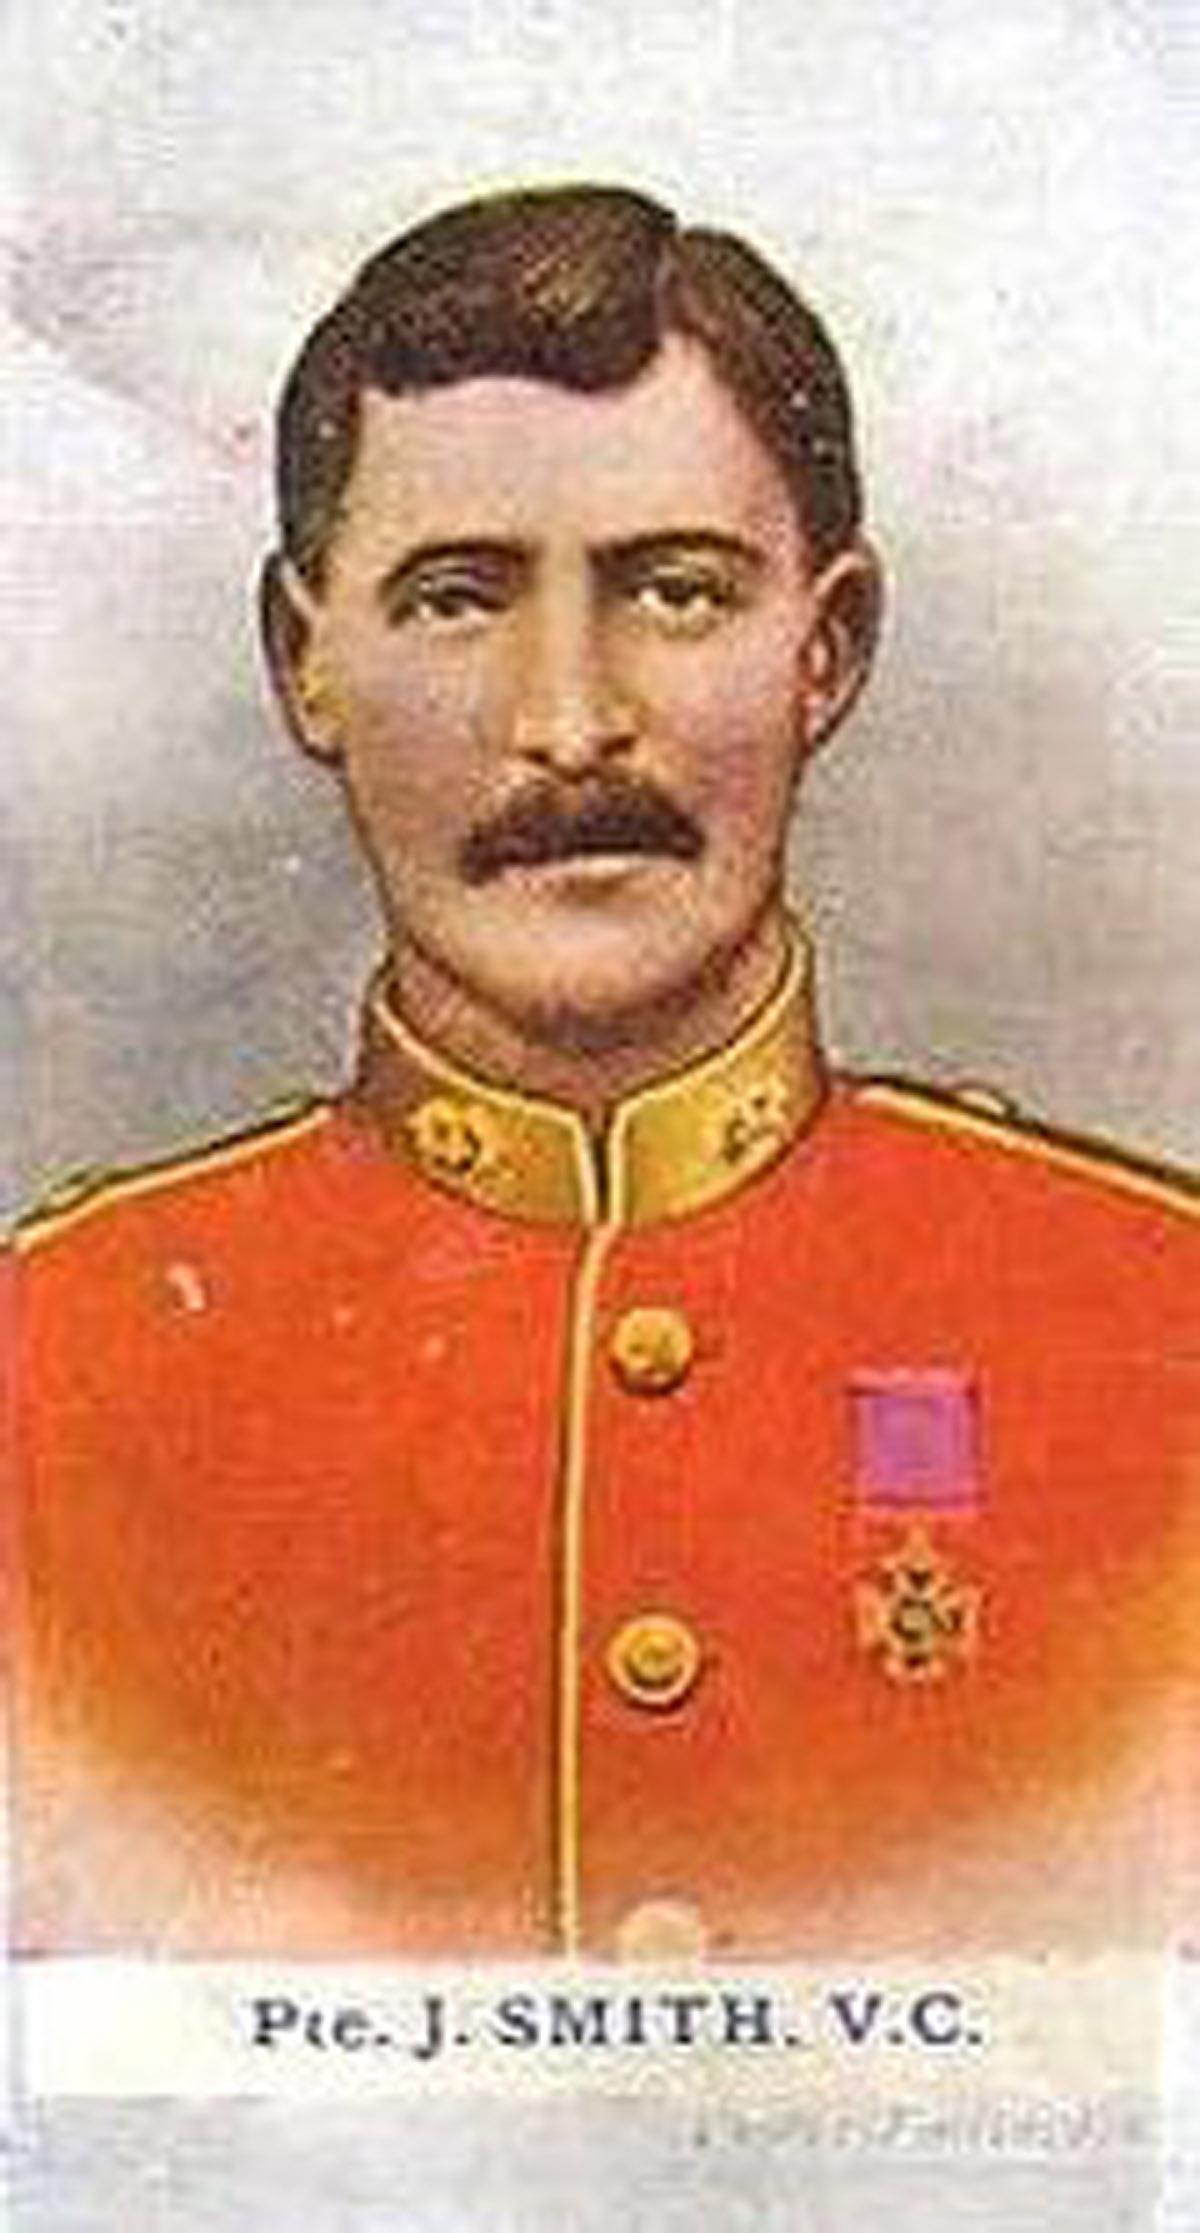 Victoria Cross winner James Alexander Smith, of Workington, who served with the Border Regiment